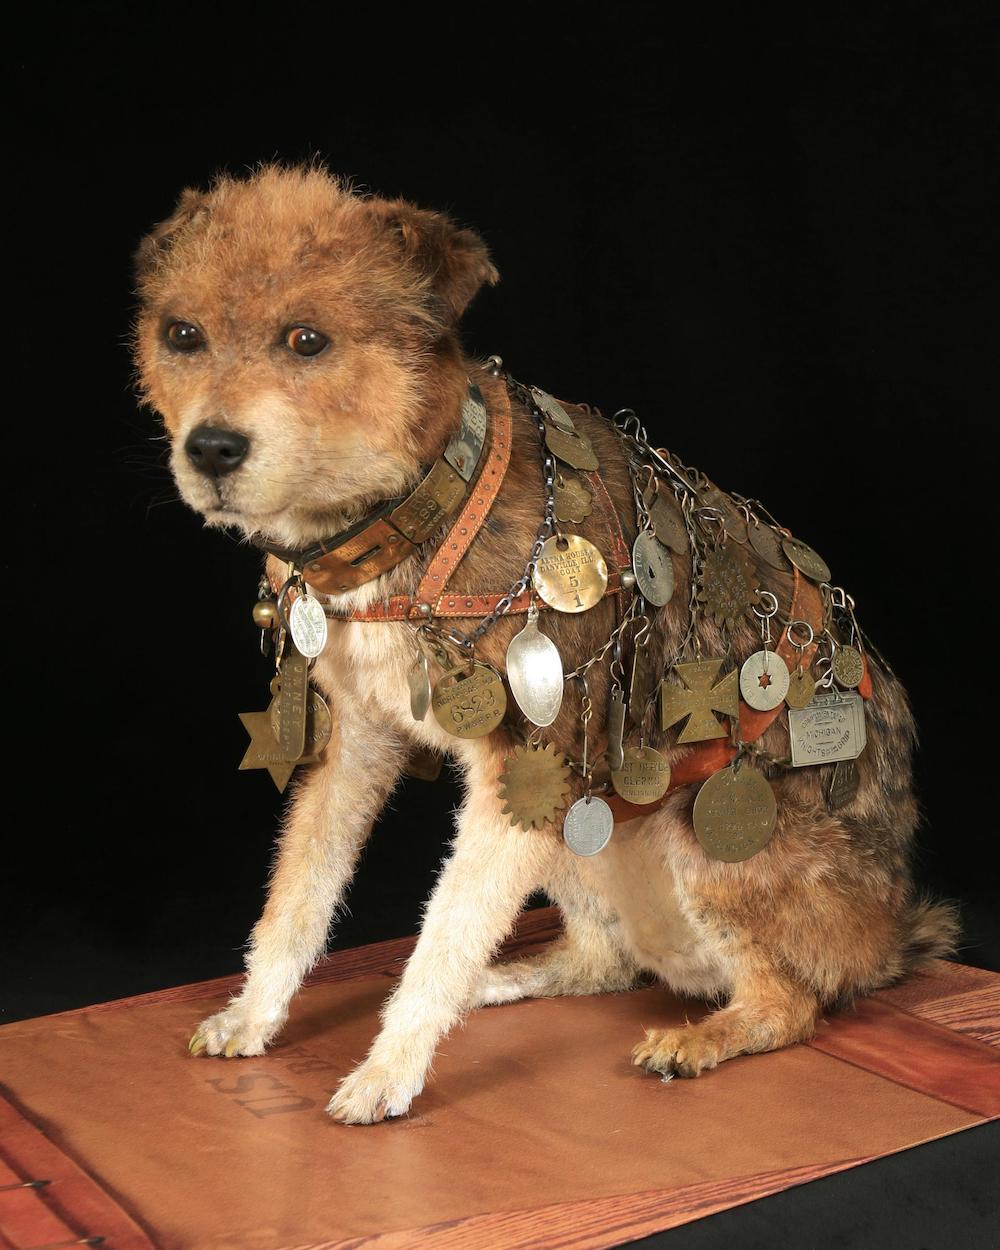 Owney is a popular exhibit at the National Postal Museum in Washington, D.C.